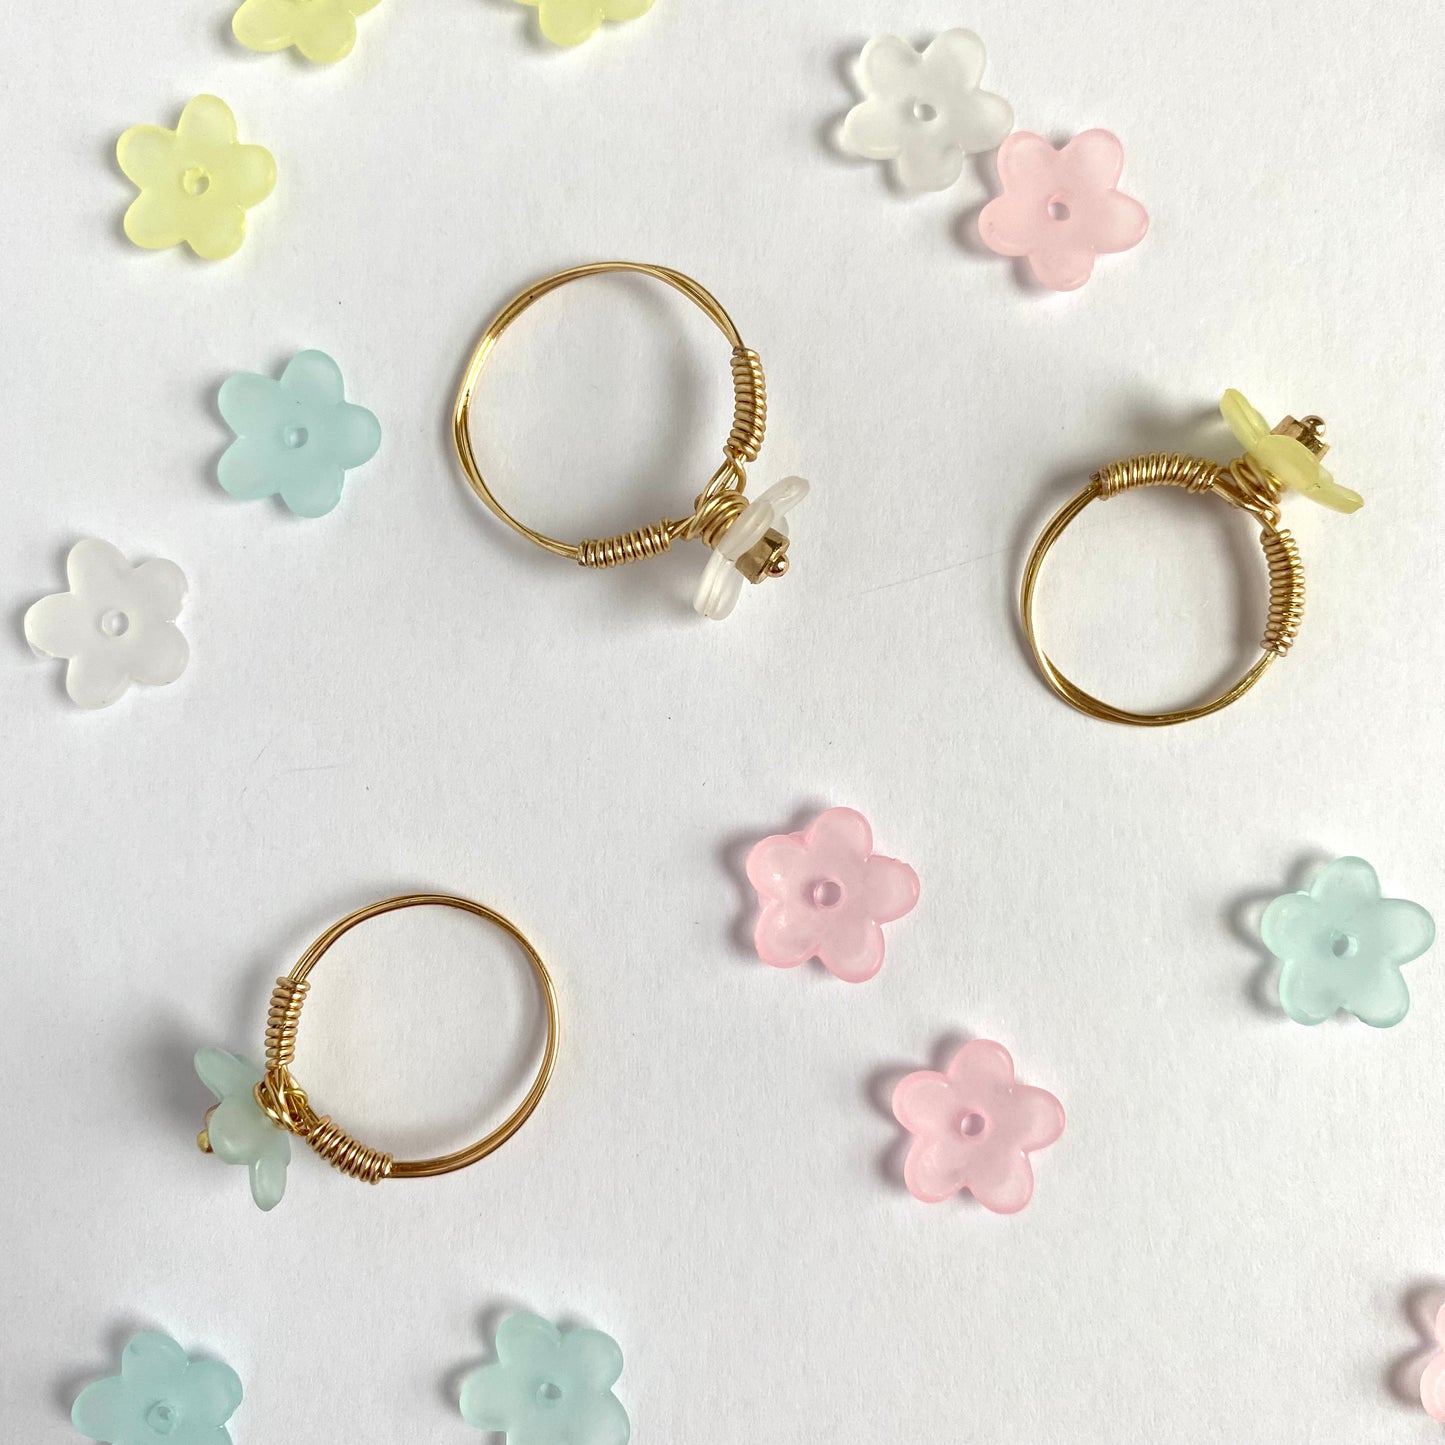 Pastel Flowers with Gold Accent Rings (Fidget Rings)